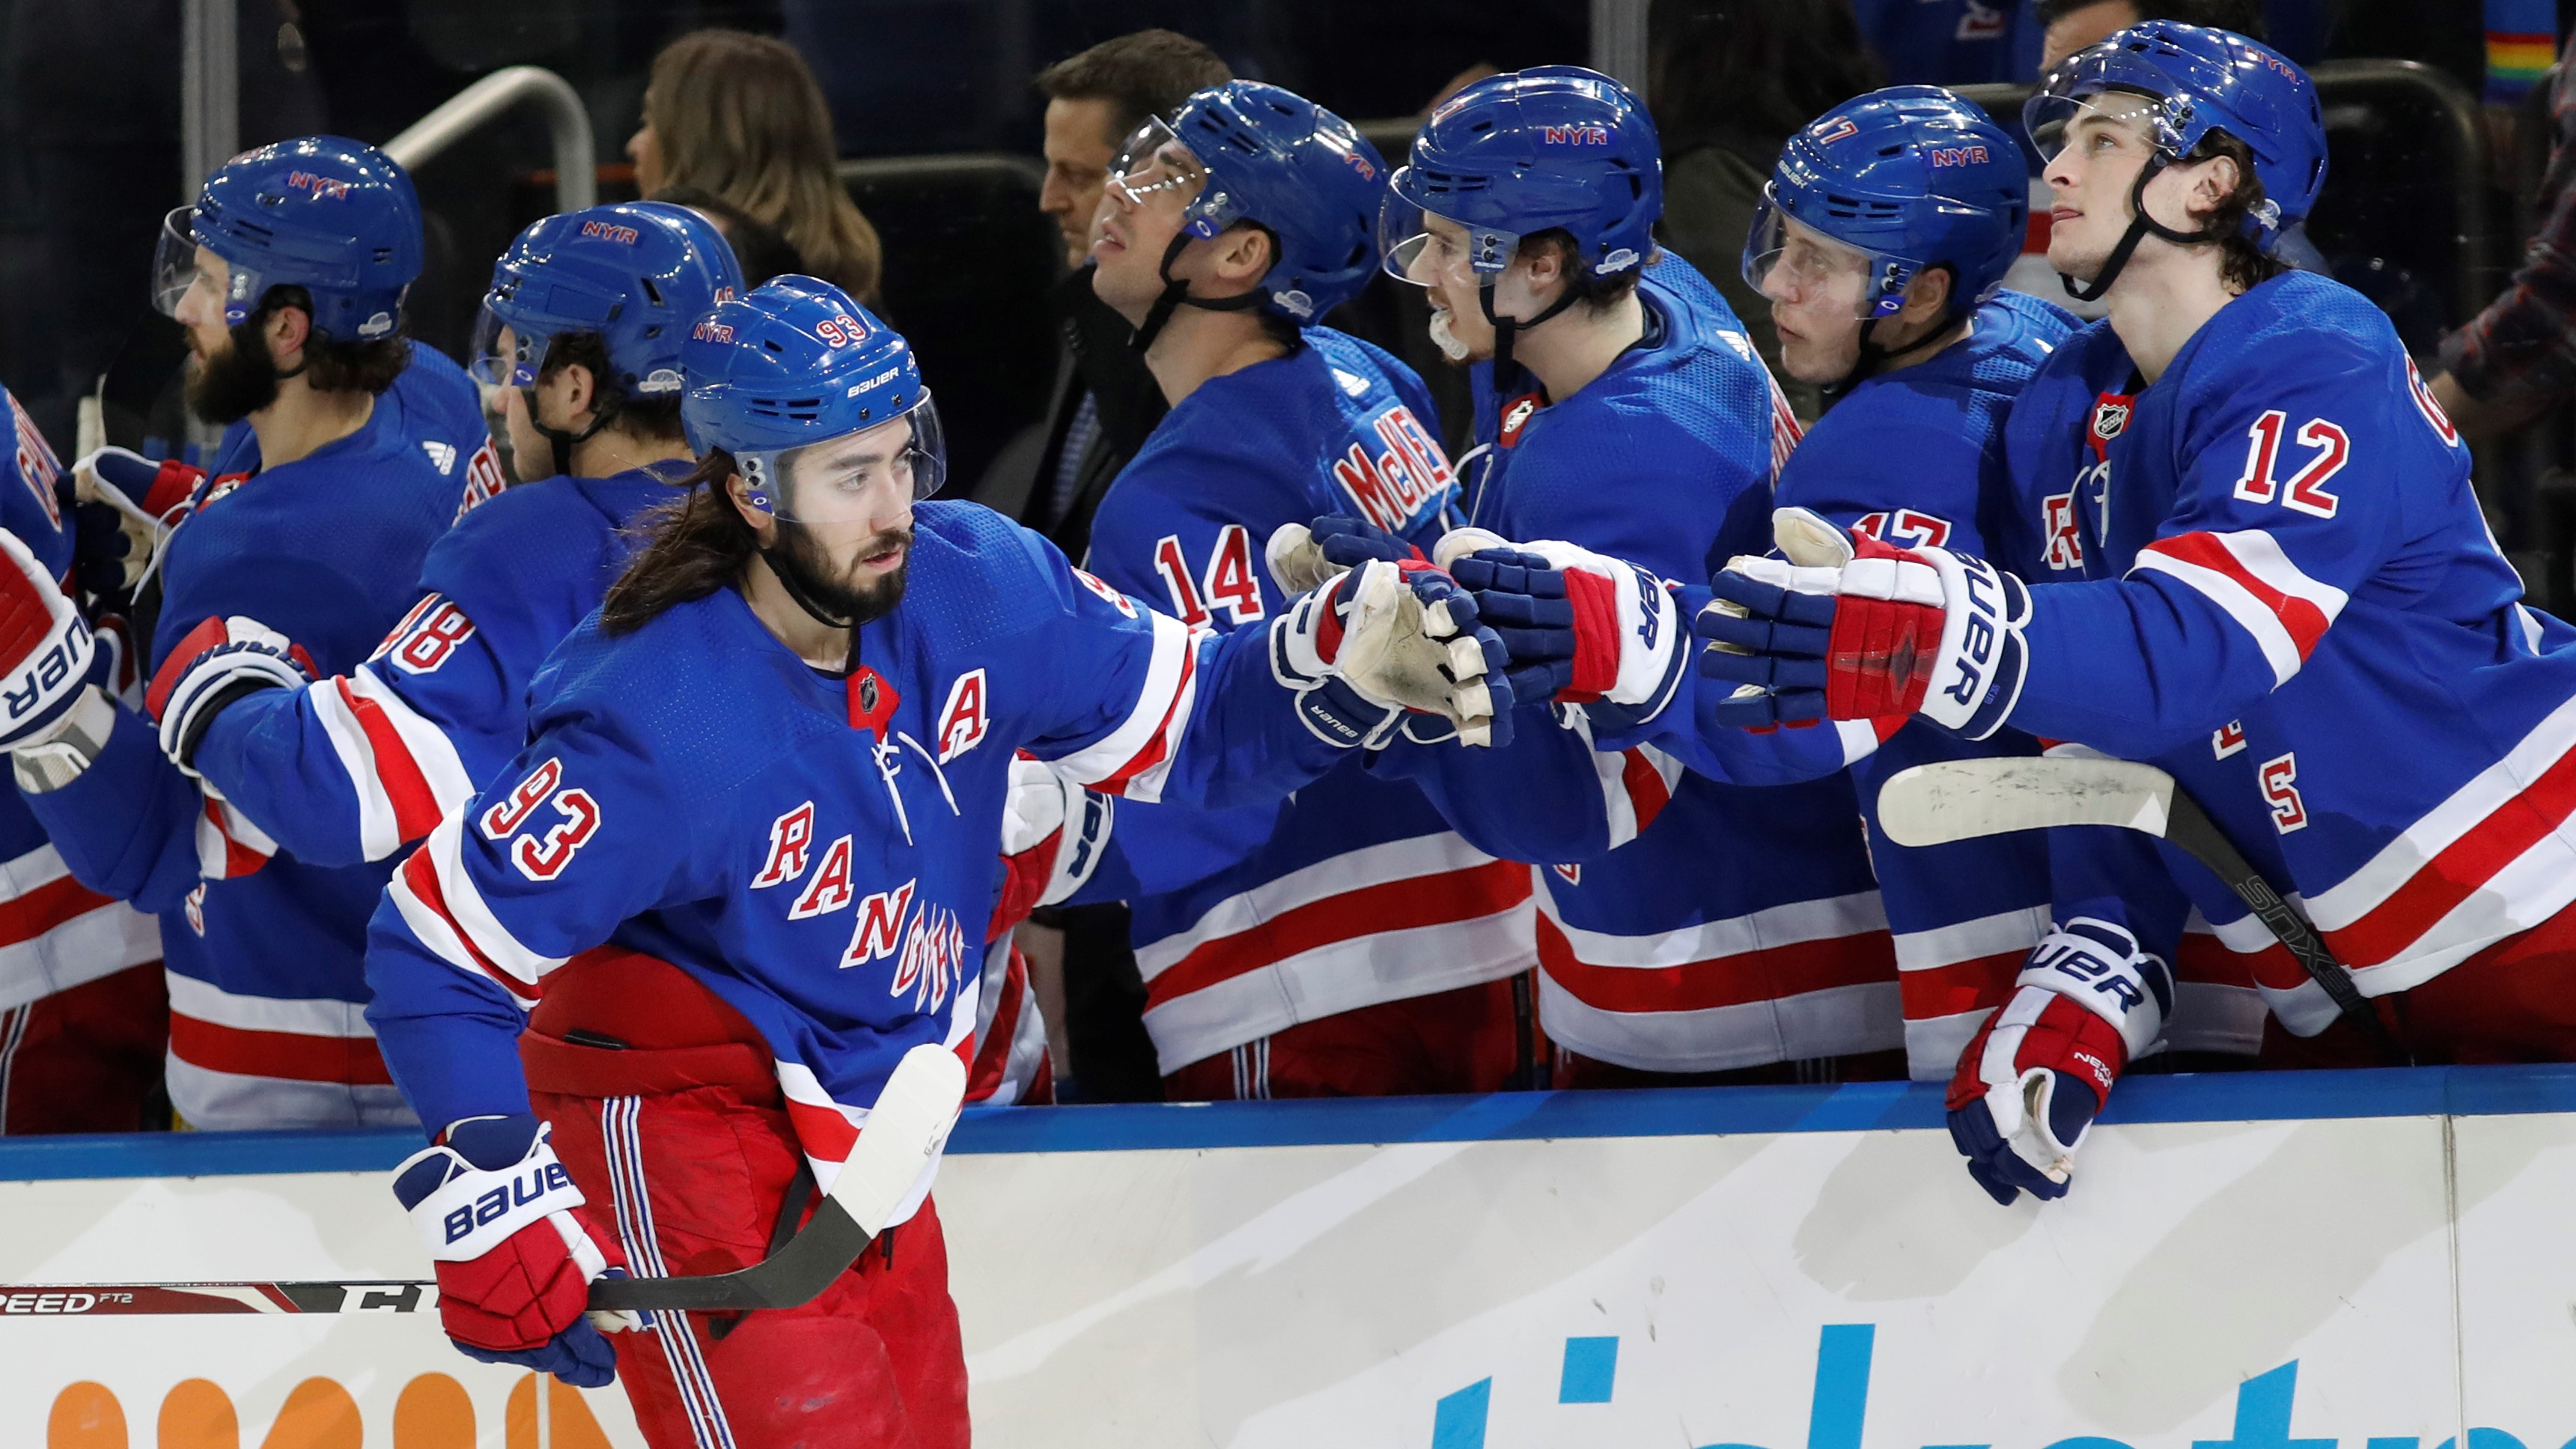 NYR: Mika Zibanejad's five goal game leads Rangers to victory